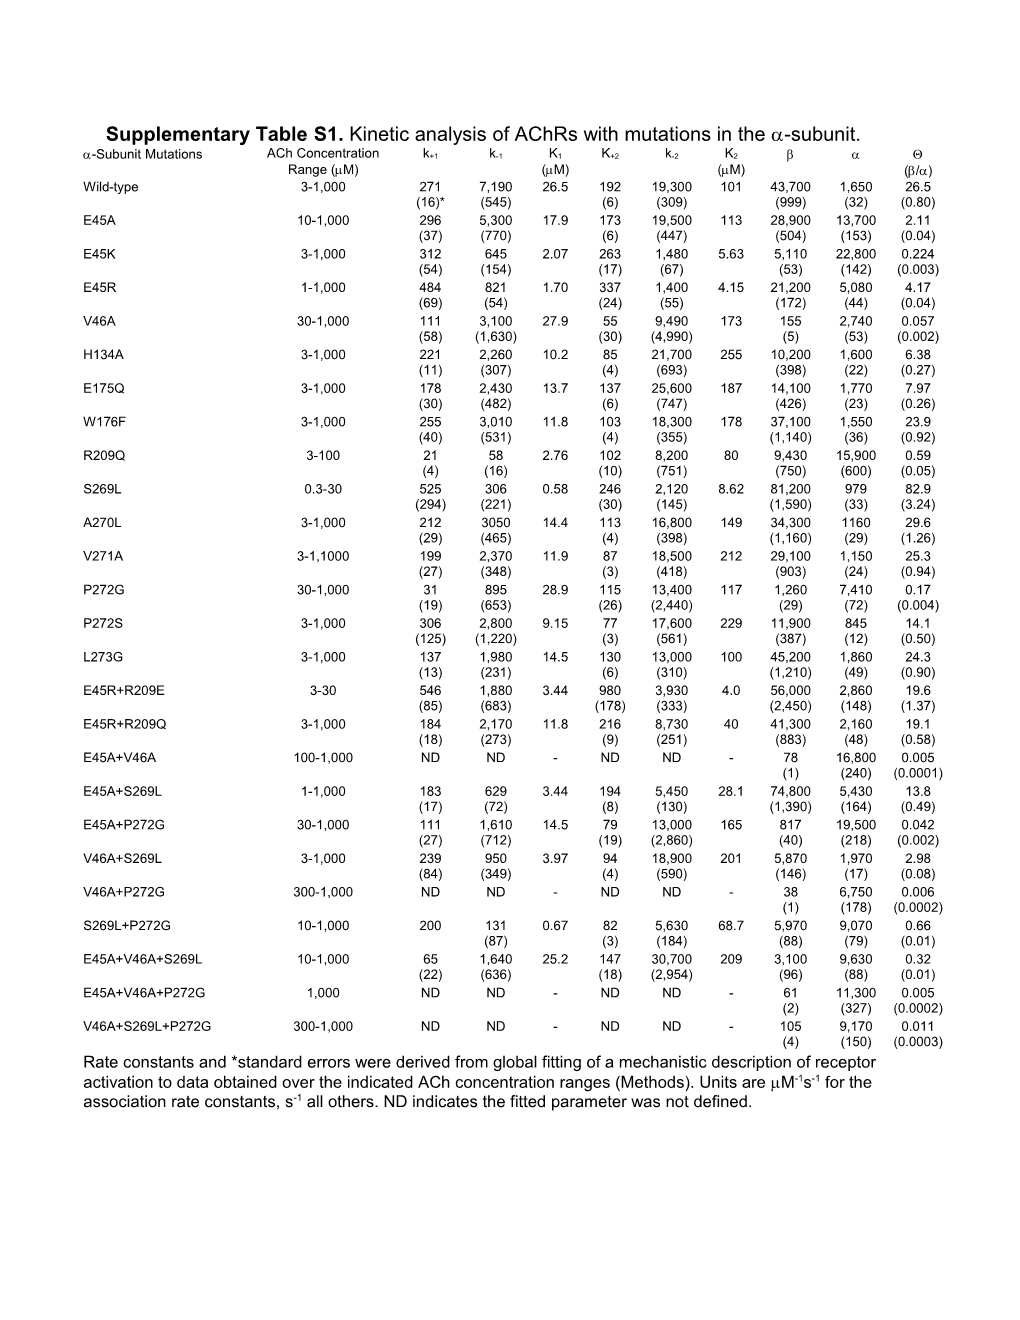 Supplementary Table 1- Kinetic Analysis of Achrs with Mutations in the -Subunit